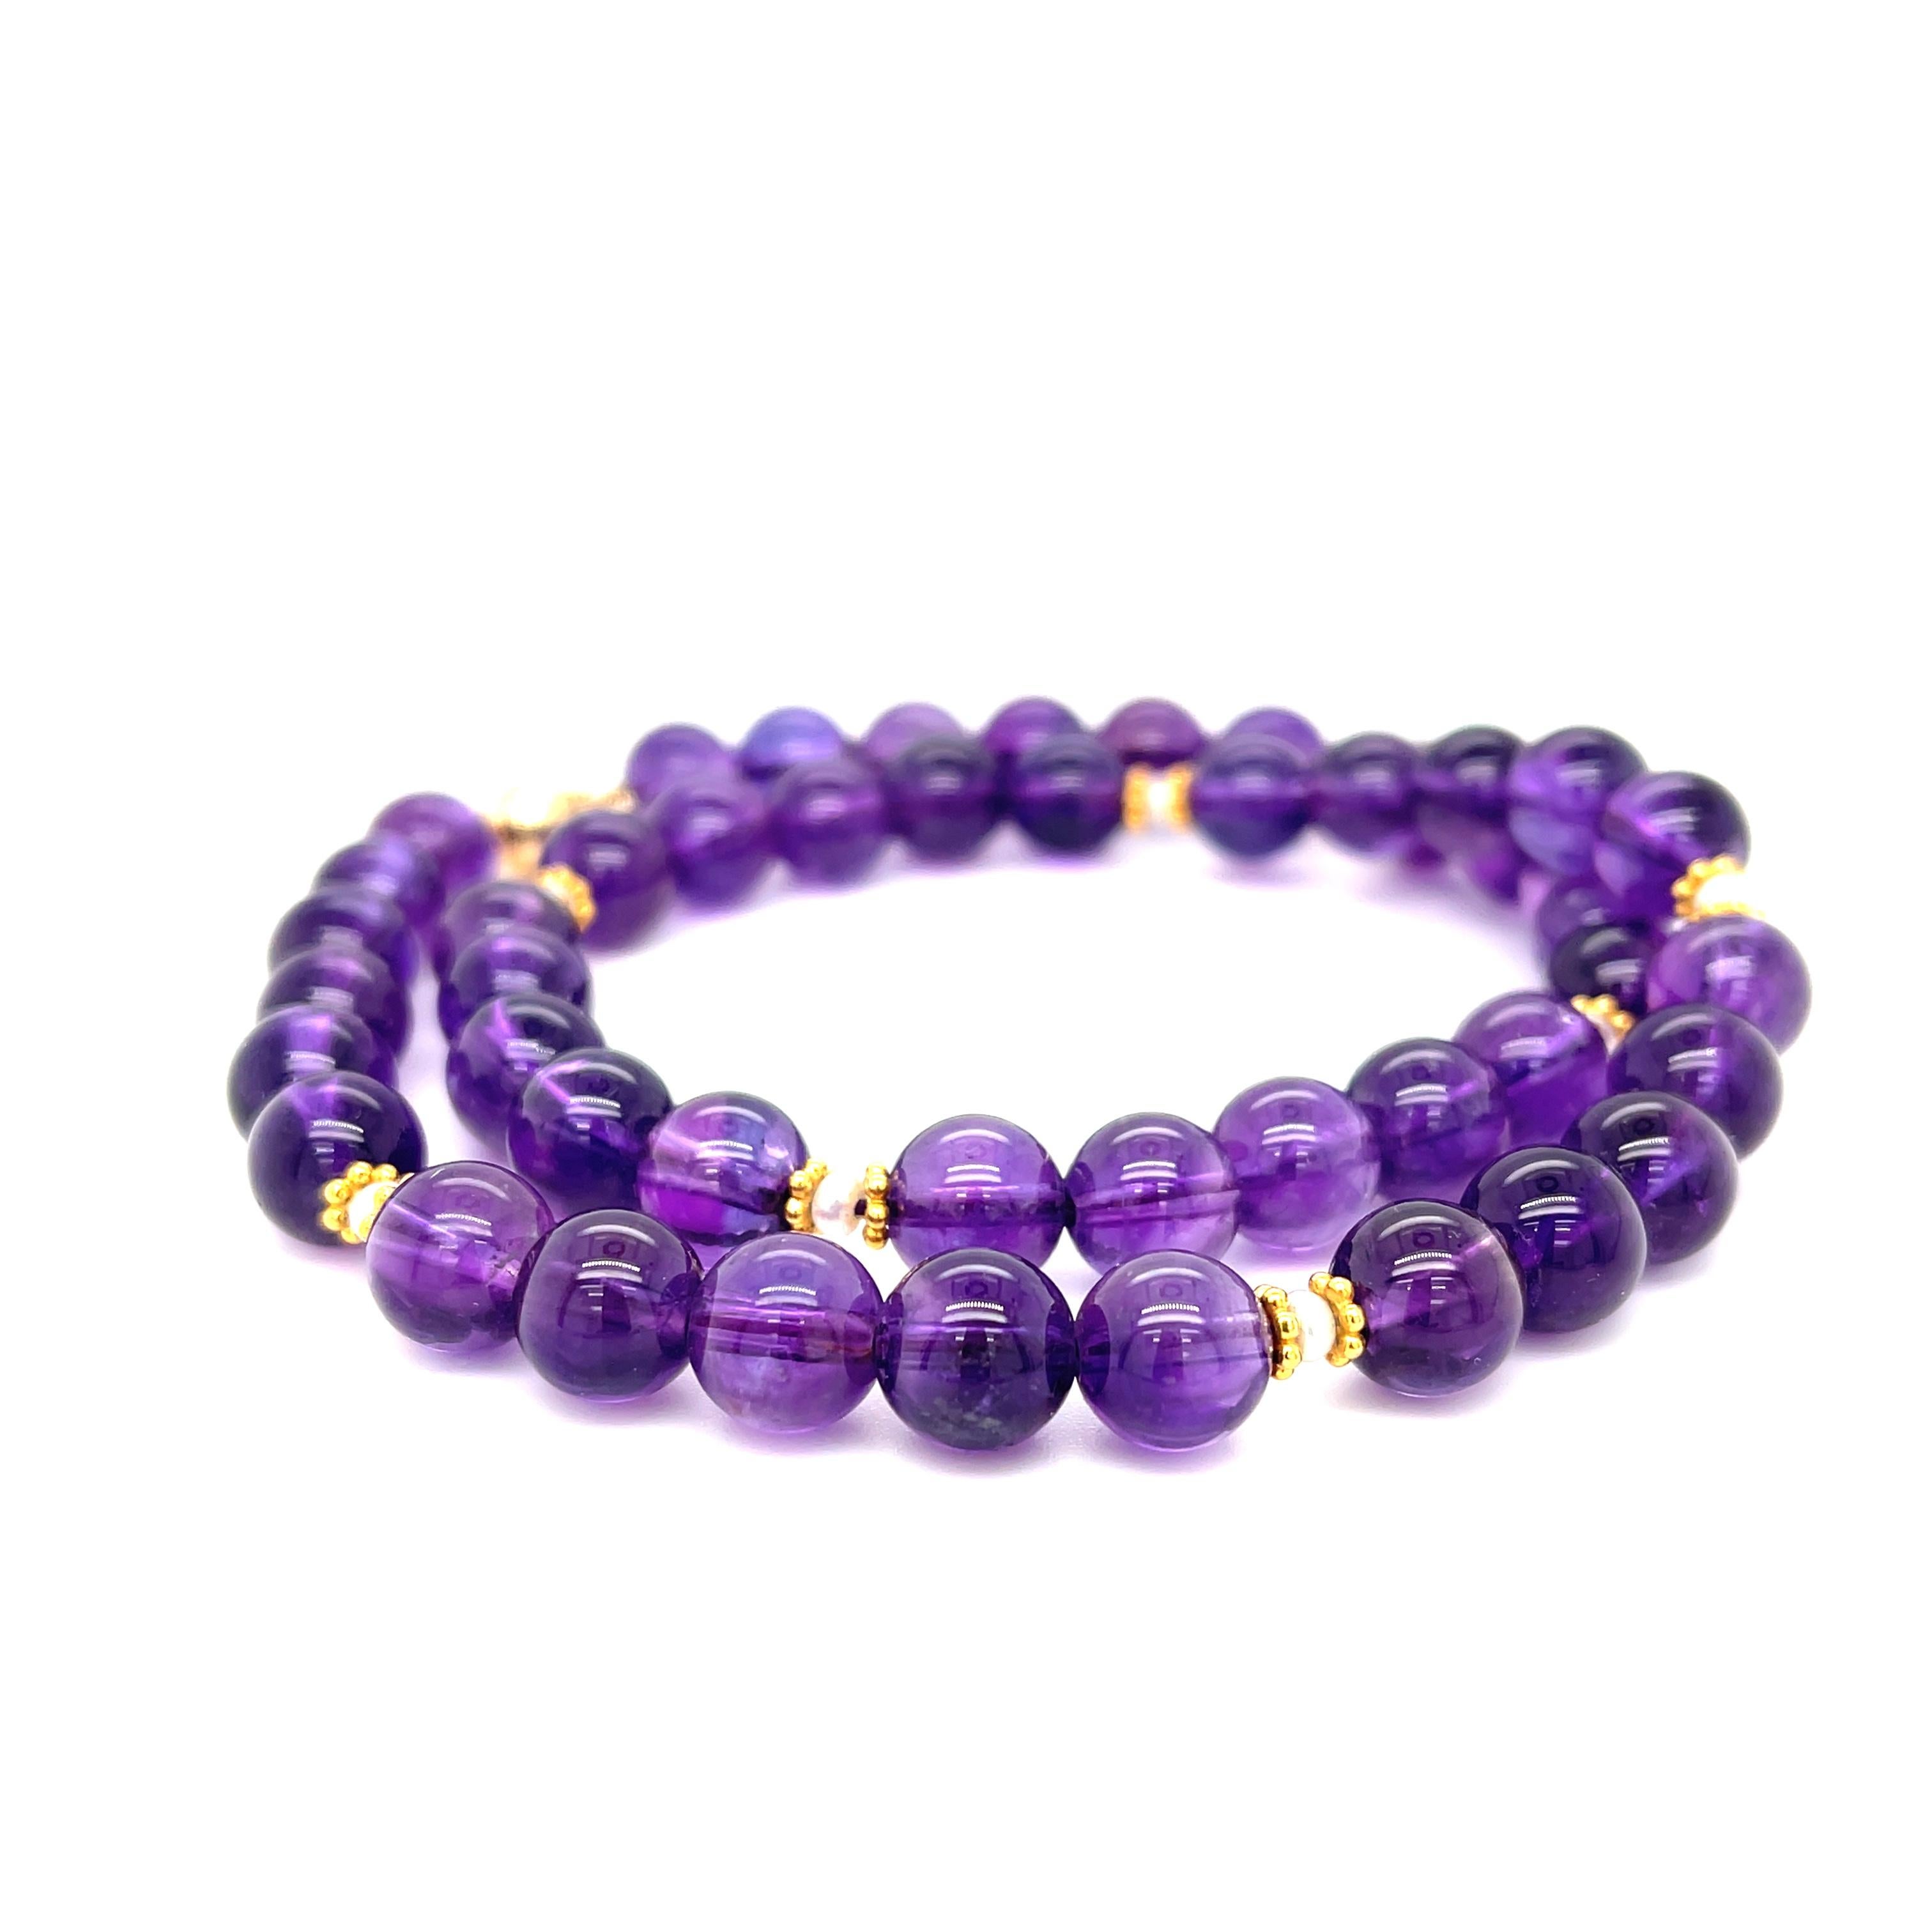 This richly colored amethyst bead necklace features gorgeous 8.25mm round amethyst beads that have been hand strung with delicate white seed pearls and 18k yellow gold beaded spacers. This combination of royal purple, gold, and pearls allow this